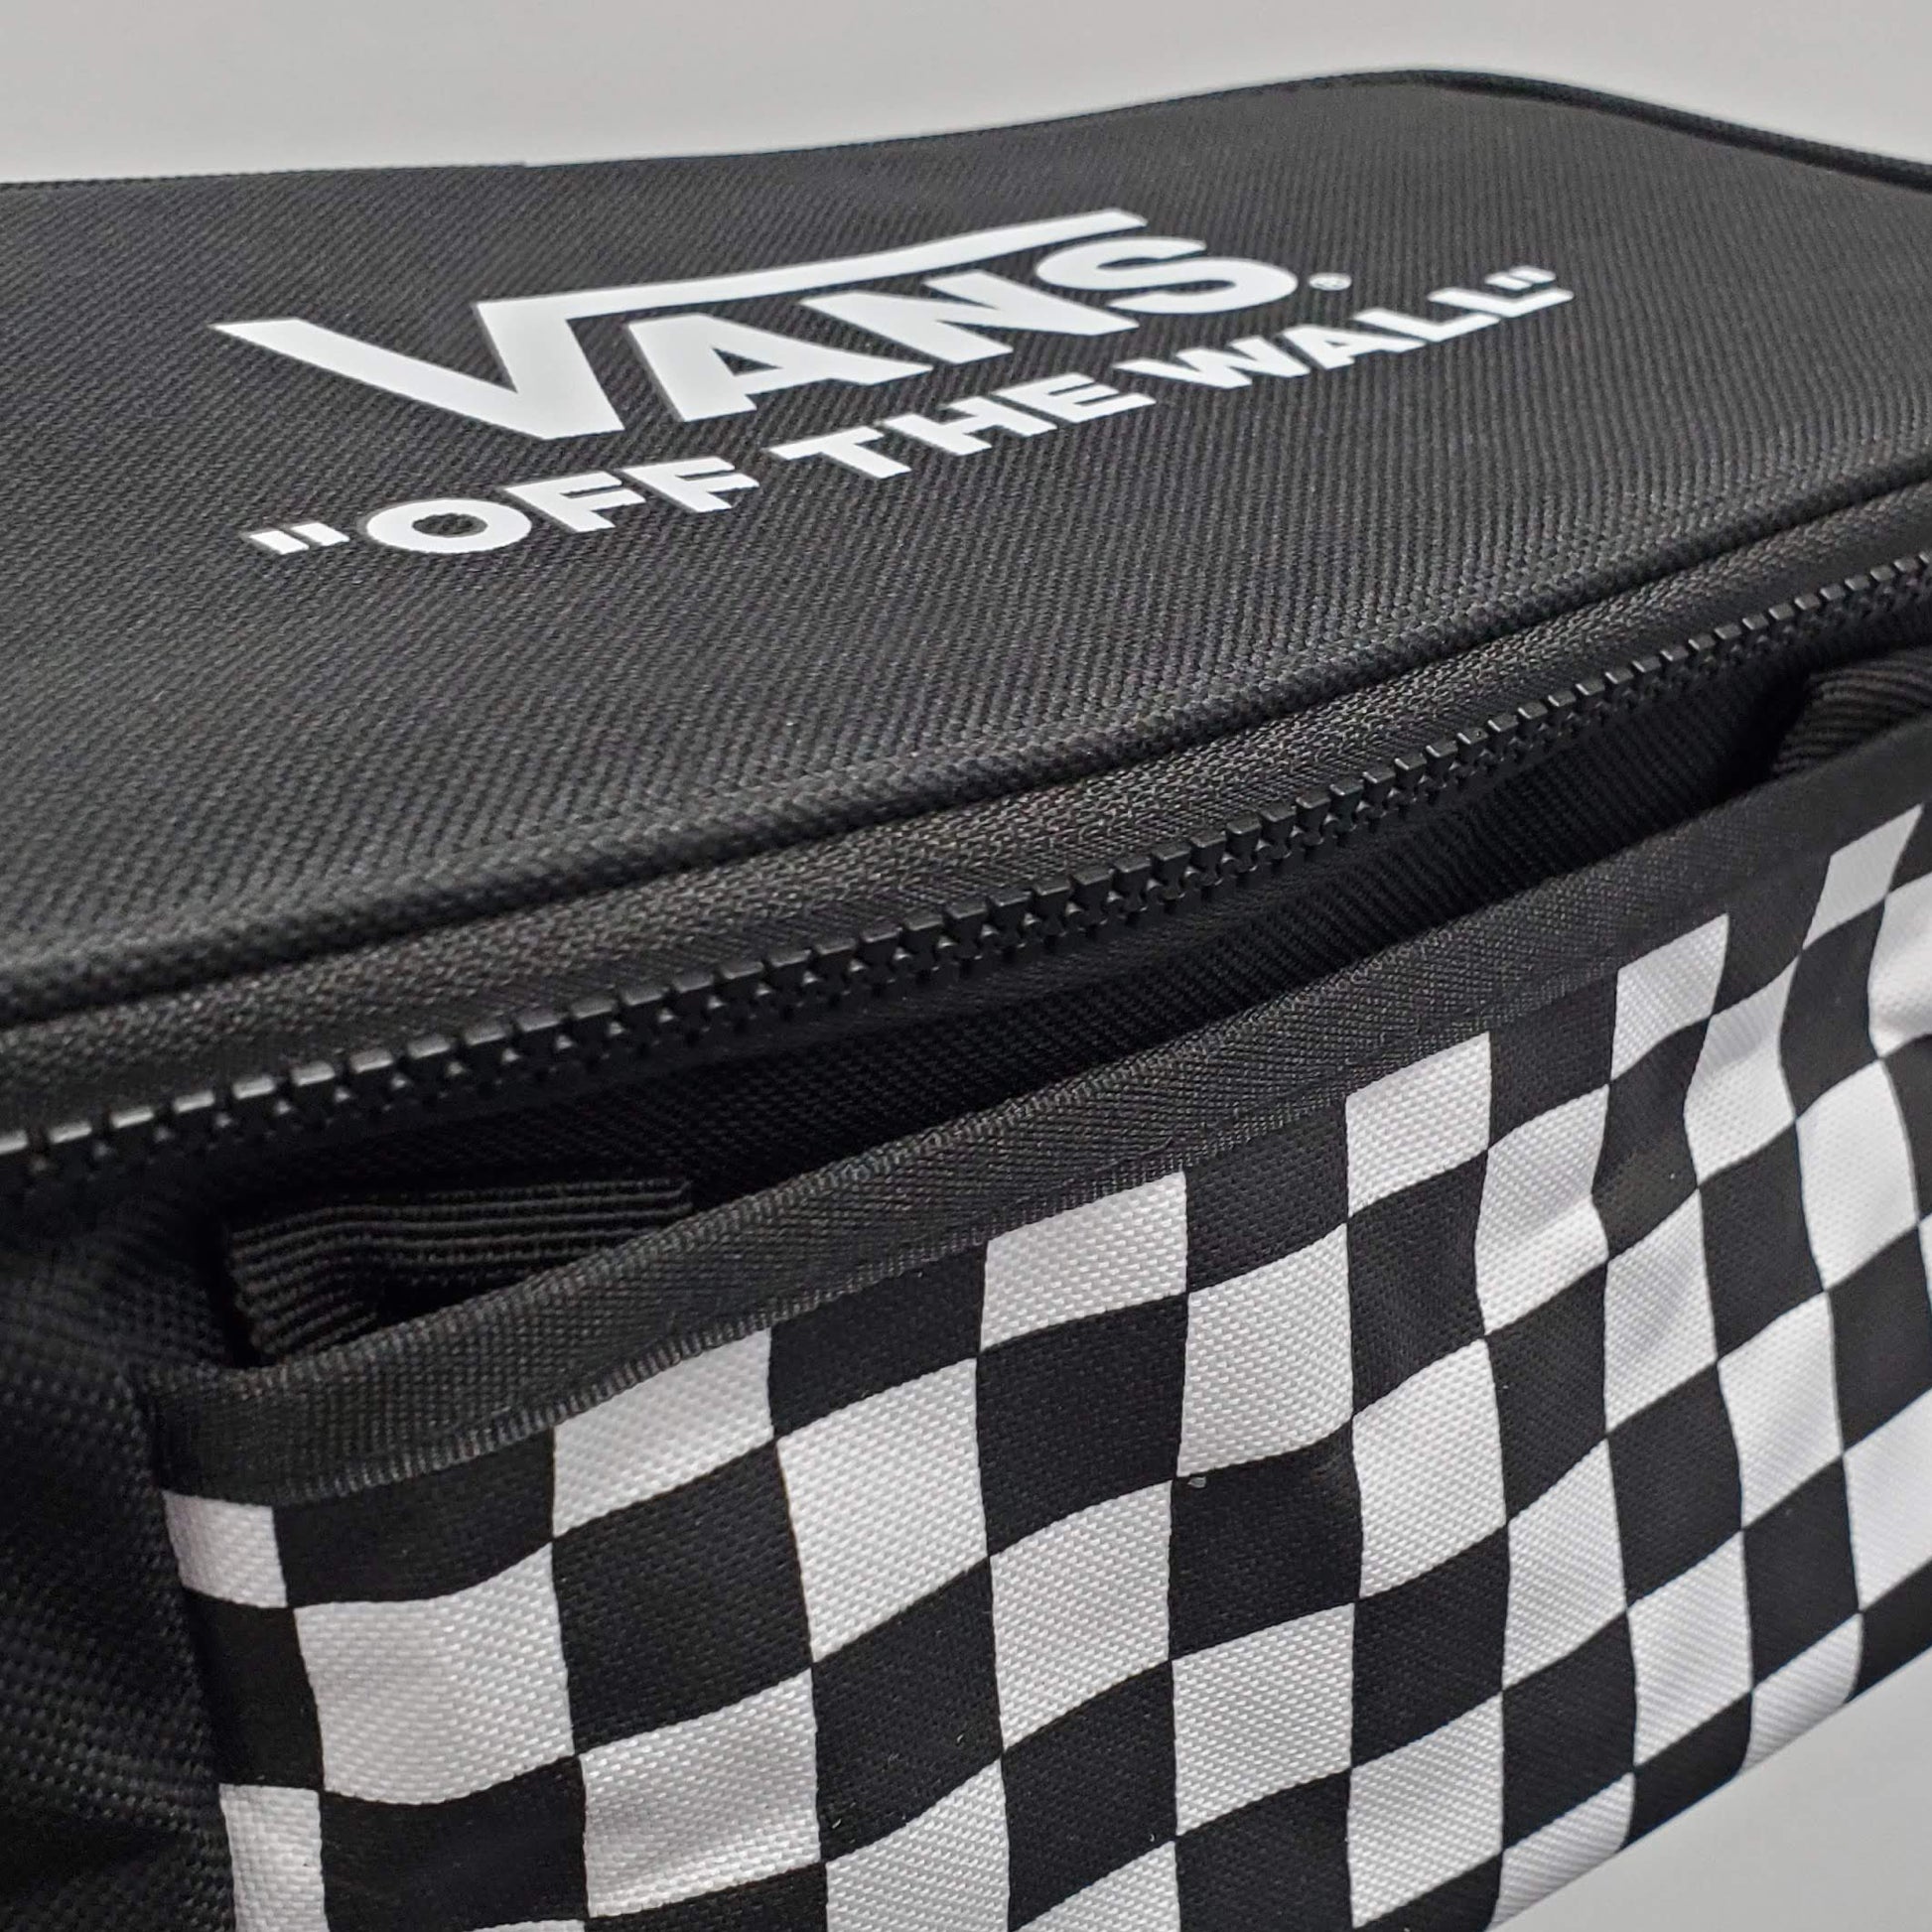 Vans Family Exclusive "OFF THE WALL" Cooler Lunch Bag 